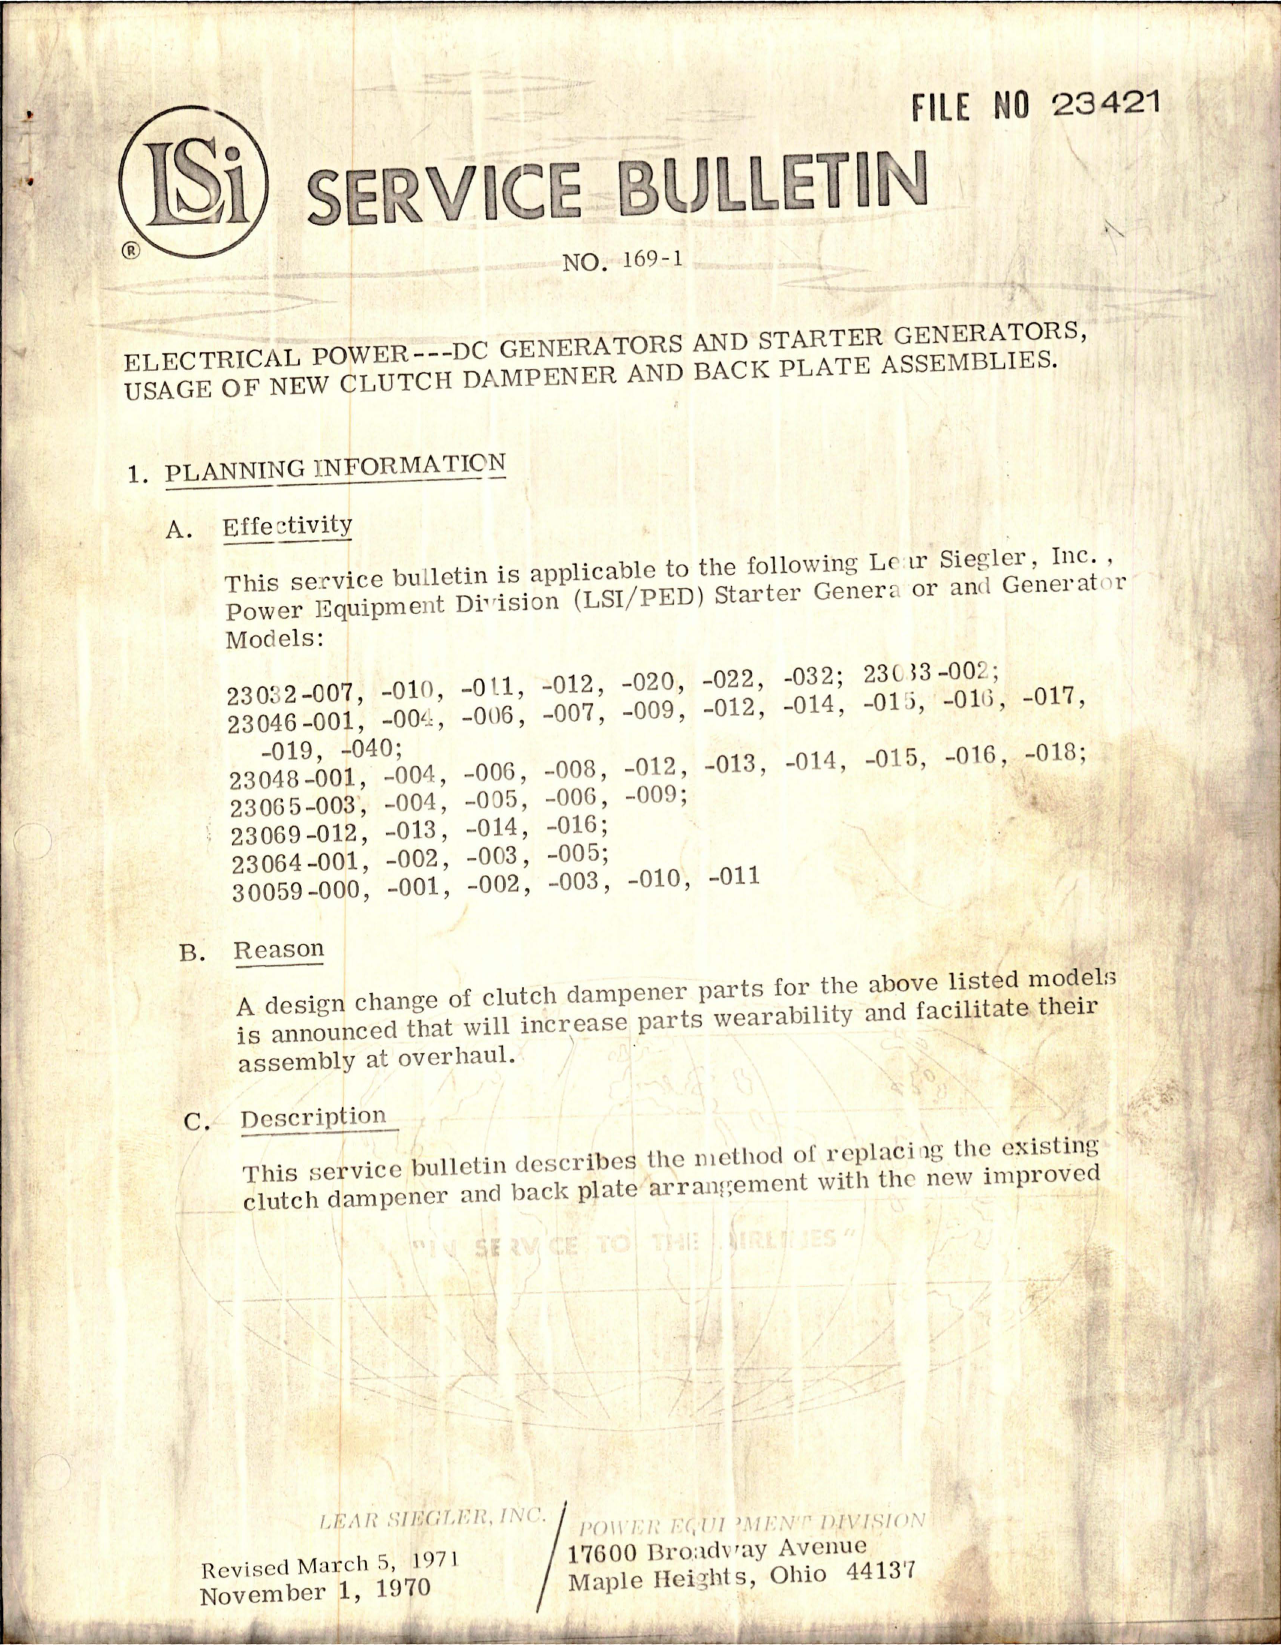 Sample page 1 from AirCorps Library document: Service Bulletin No. 169-1 for DC Generator and Starter Generators - Usage of New Clutch Dampener and Back Plate Assemblies